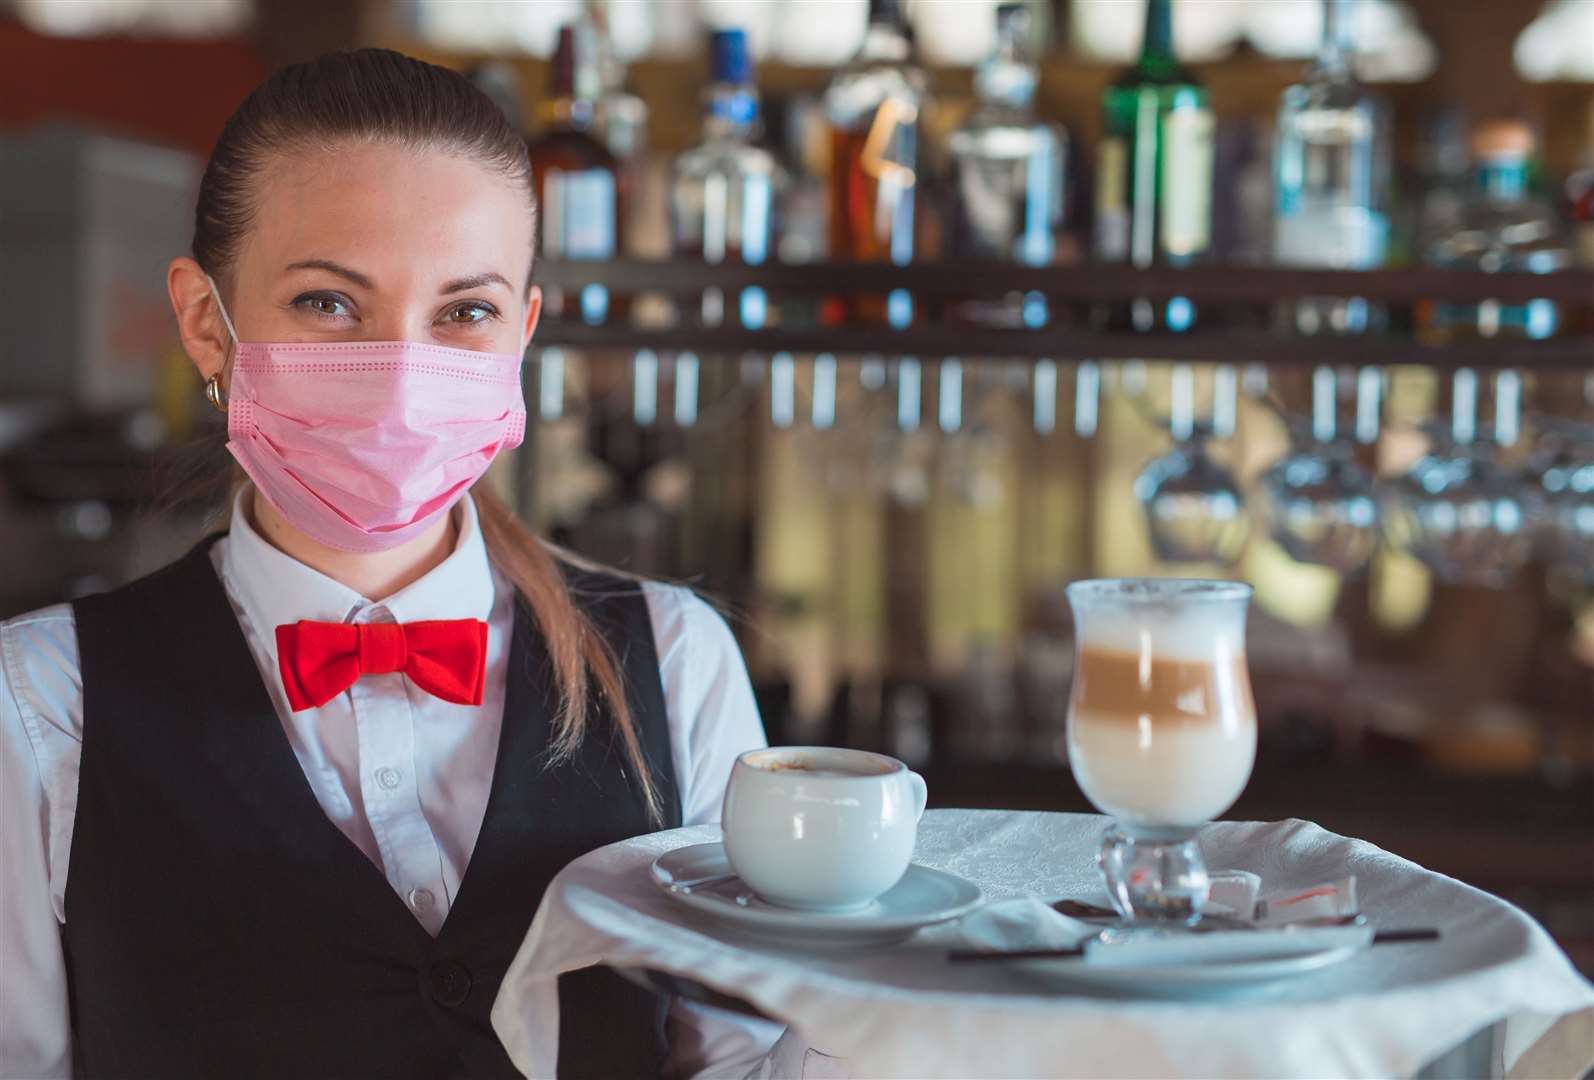 If fewer people visit cafés and restaurants, these businesses will need fewer staff.